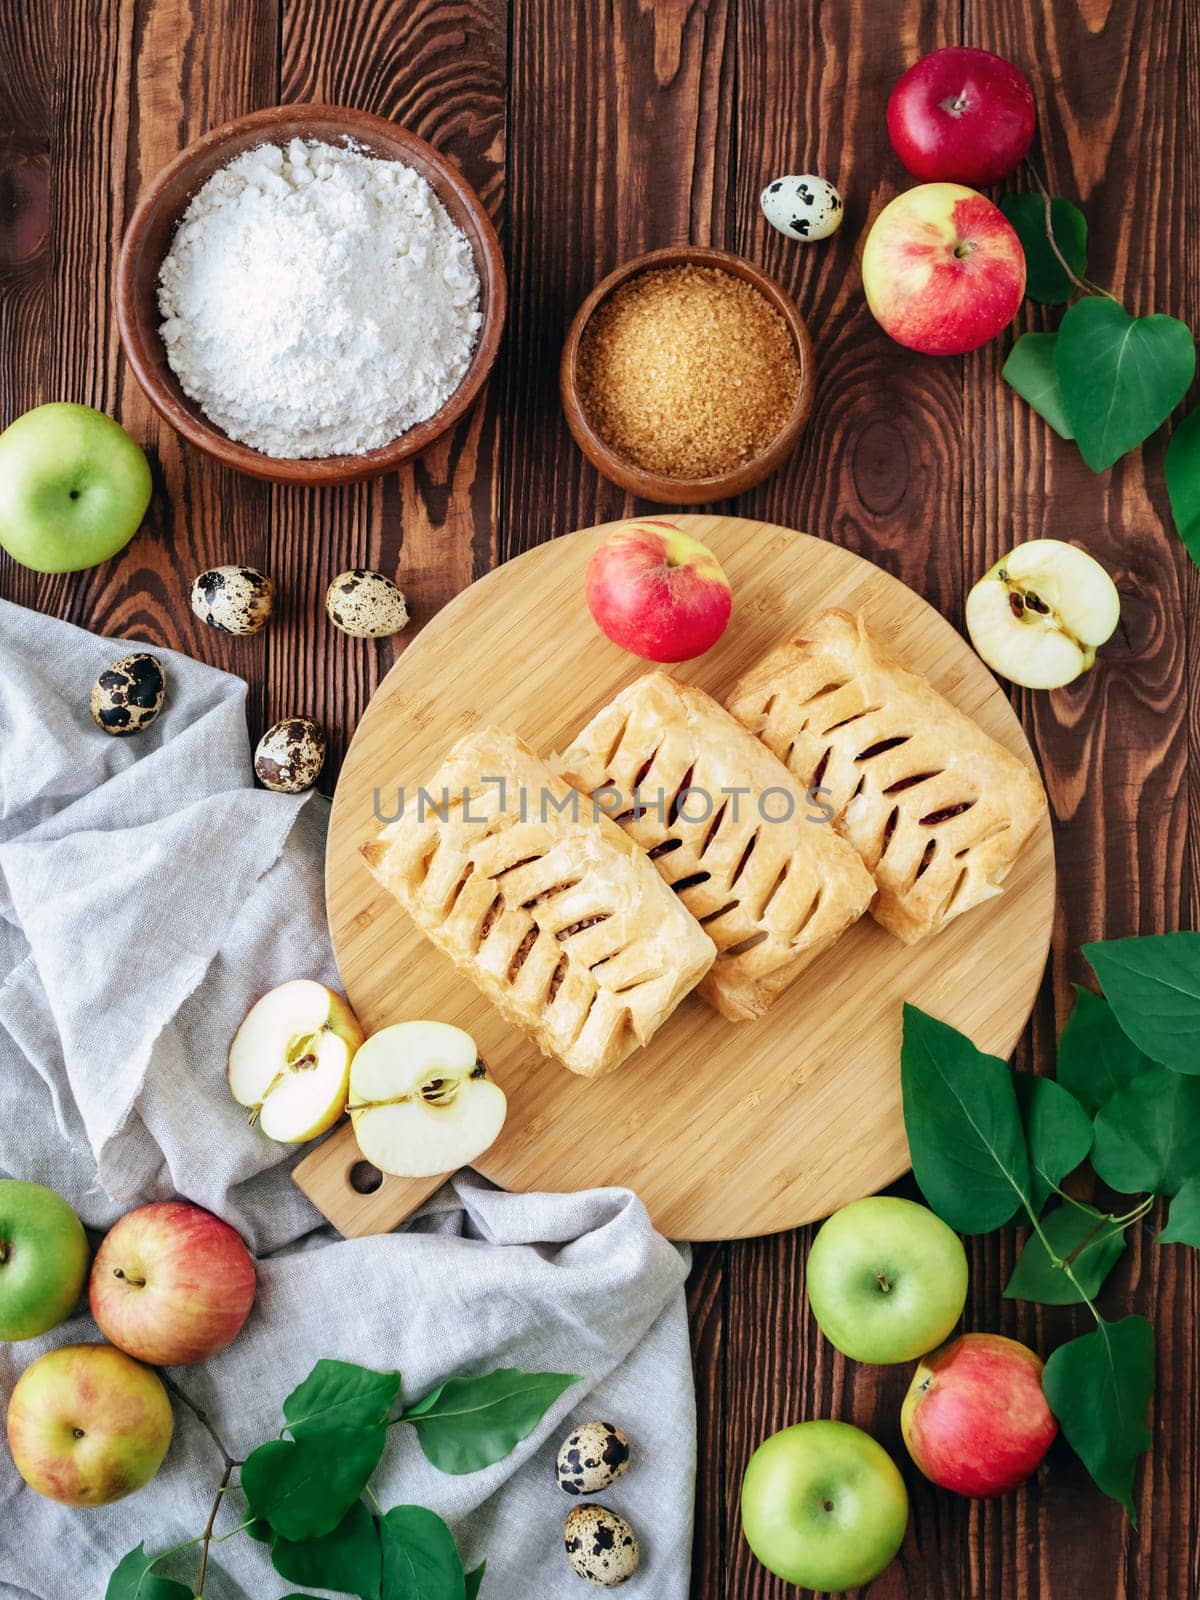 Autumn baking concept. Top view food photography. Baked puff pastry crispy apple puff with ingredients on a rustic wooden table. Puff pastry pies with apples, brown sugar, eggs, flour and towel.